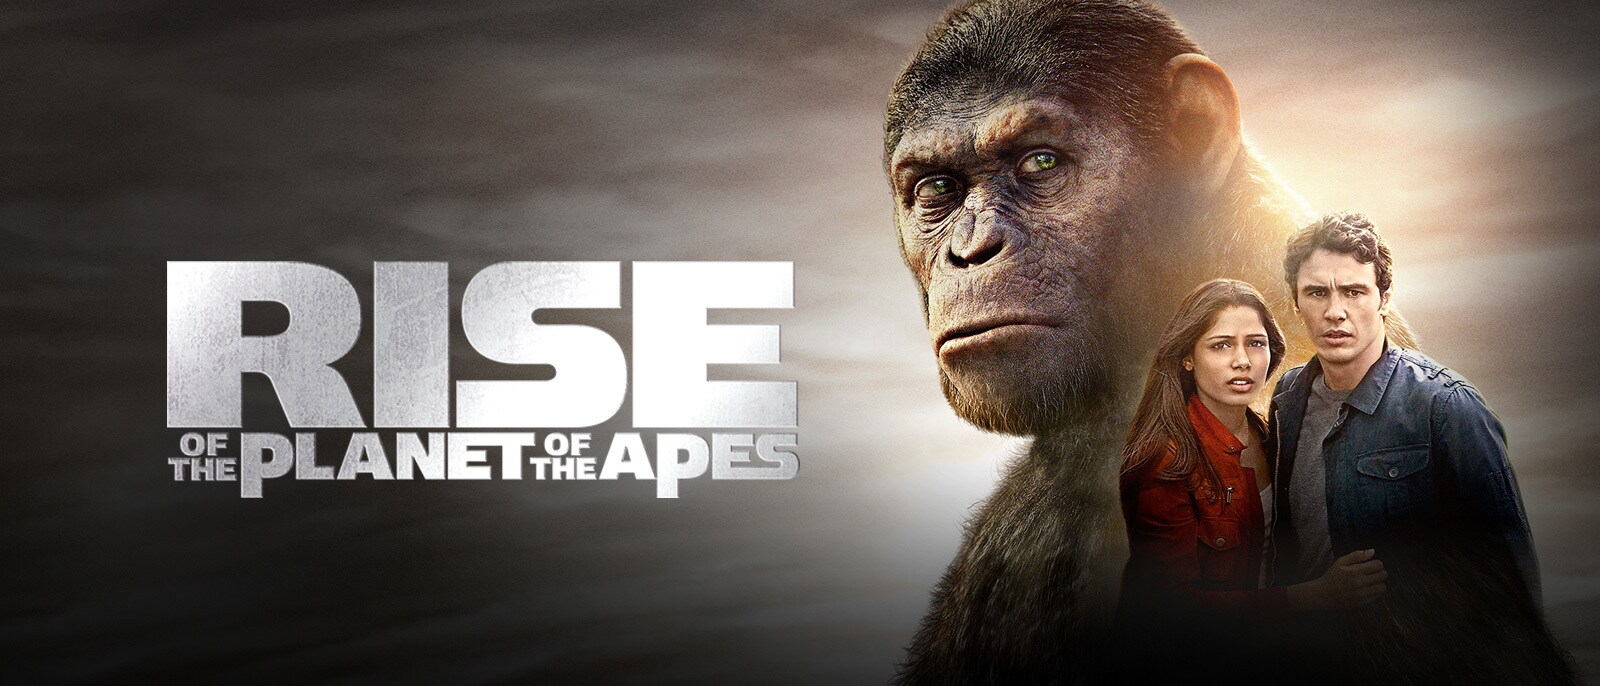 rise of the planet of the apes full movie free download in hindi hd